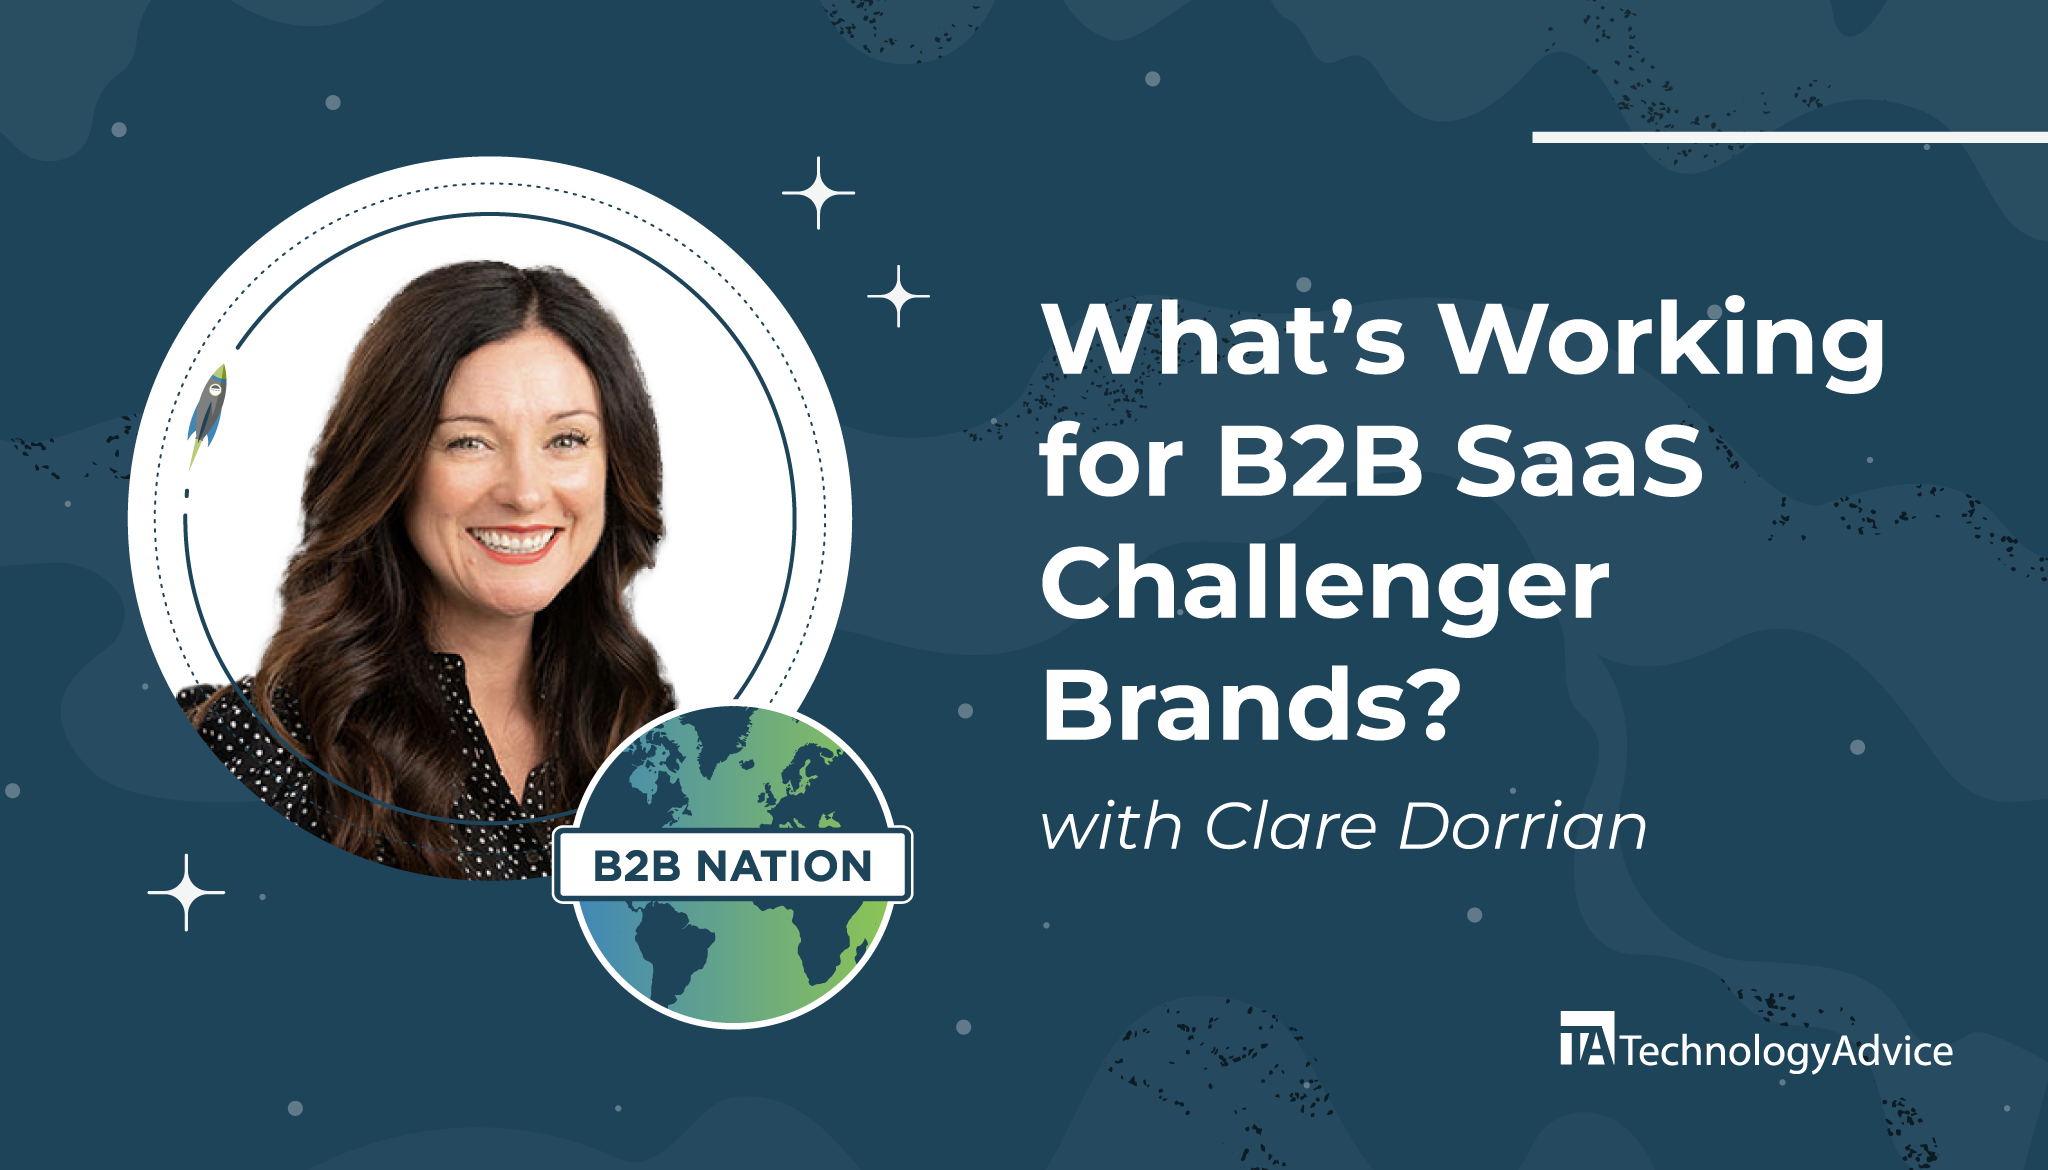 What’s Working for B2B SaaS Challenger Brands?